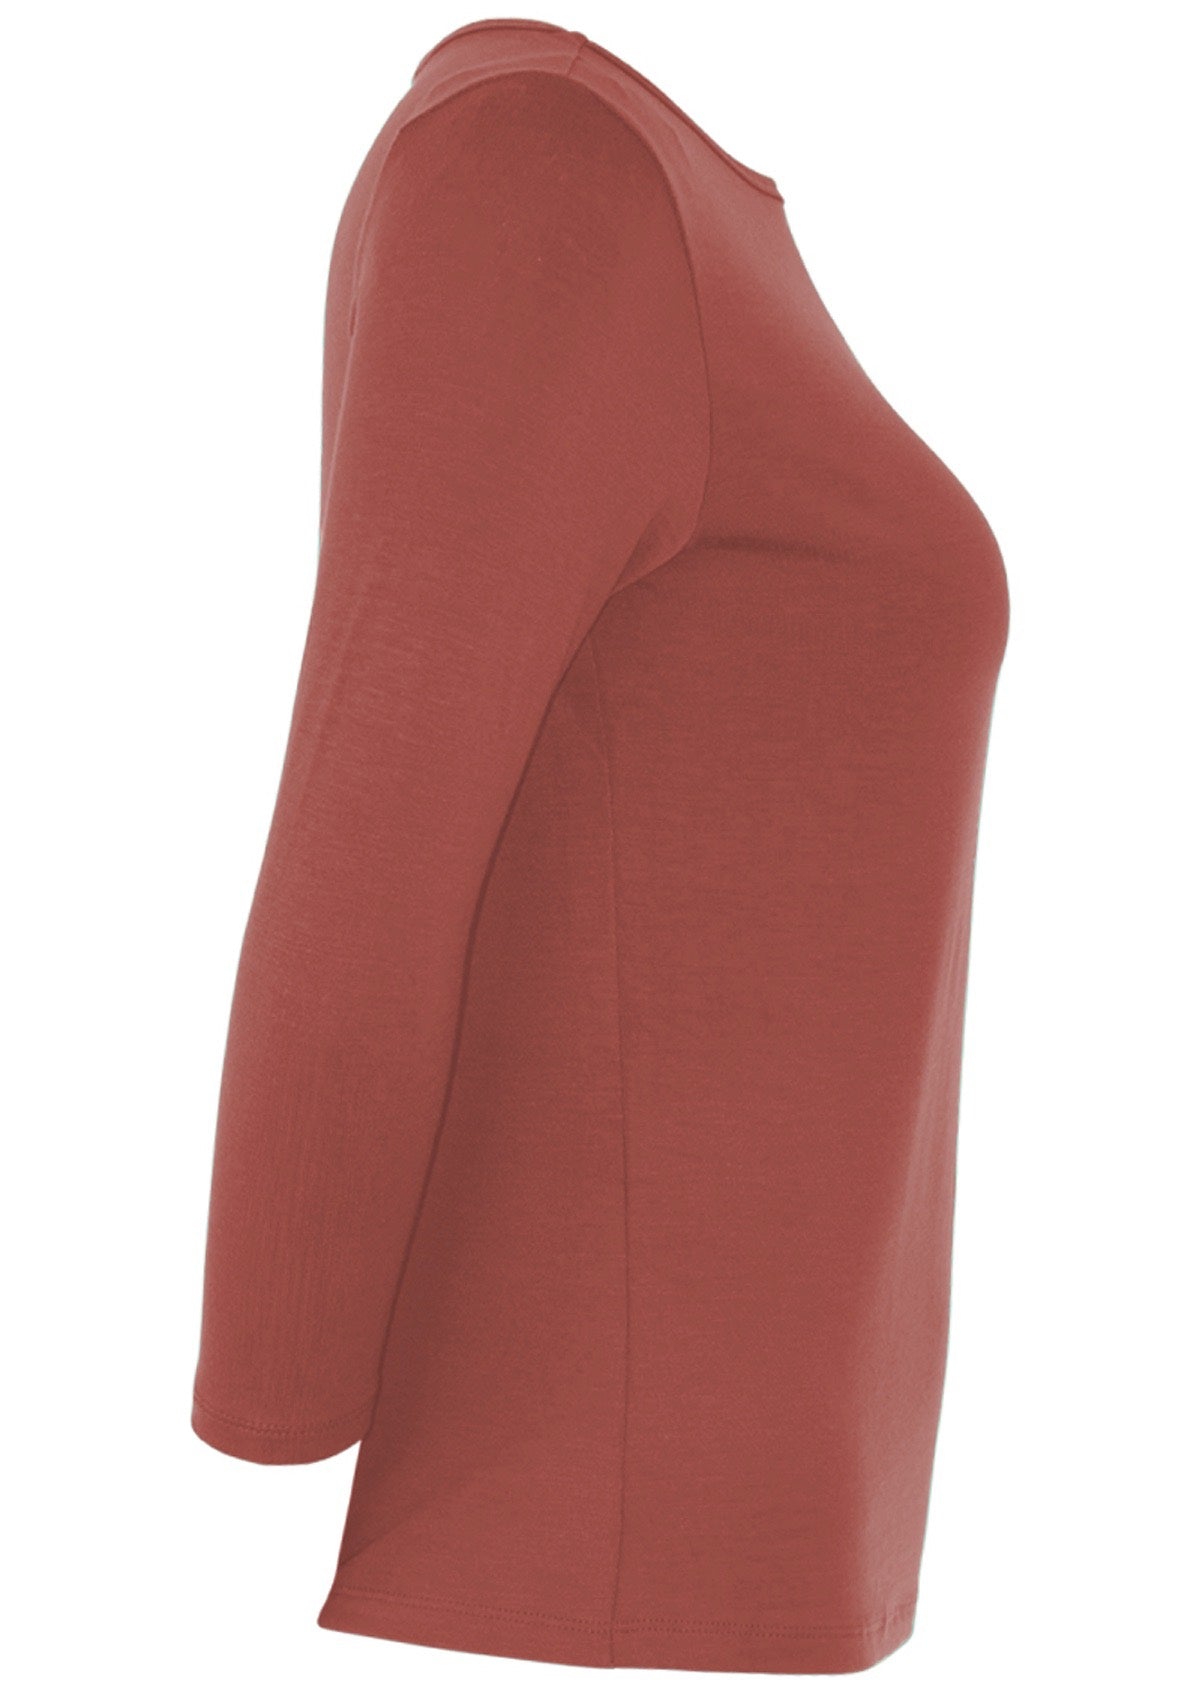 Side view of women's rayon boat neck terracotta pink 3/4 sleeve top.